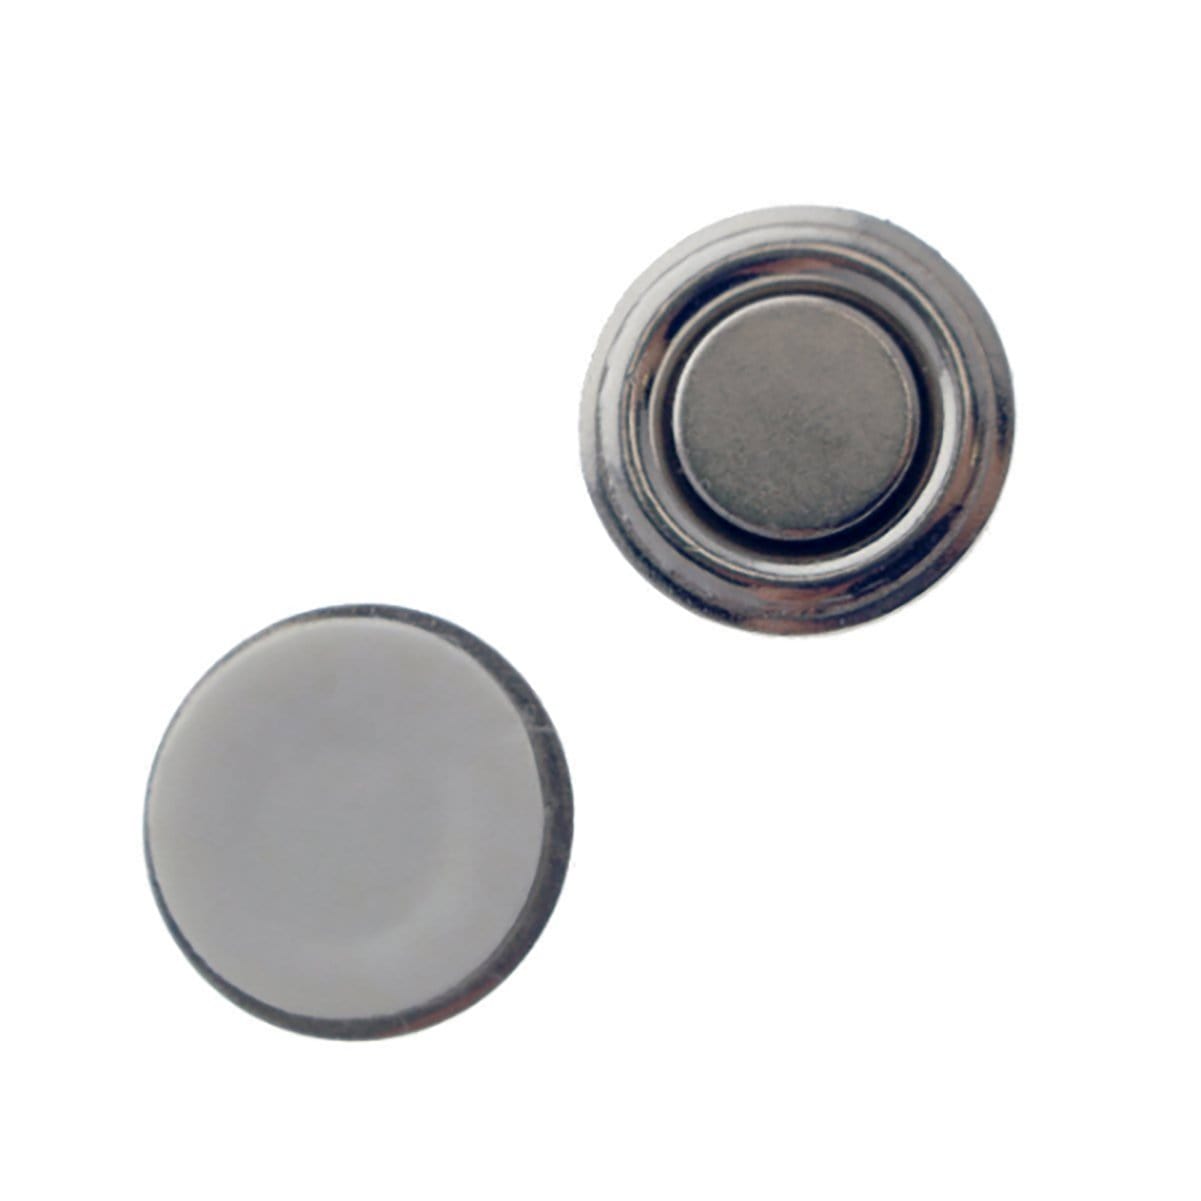 Magnetic Badge Holder with Sticky Back (P/N 5730-3030) and more Magnet at SpecialistID.com